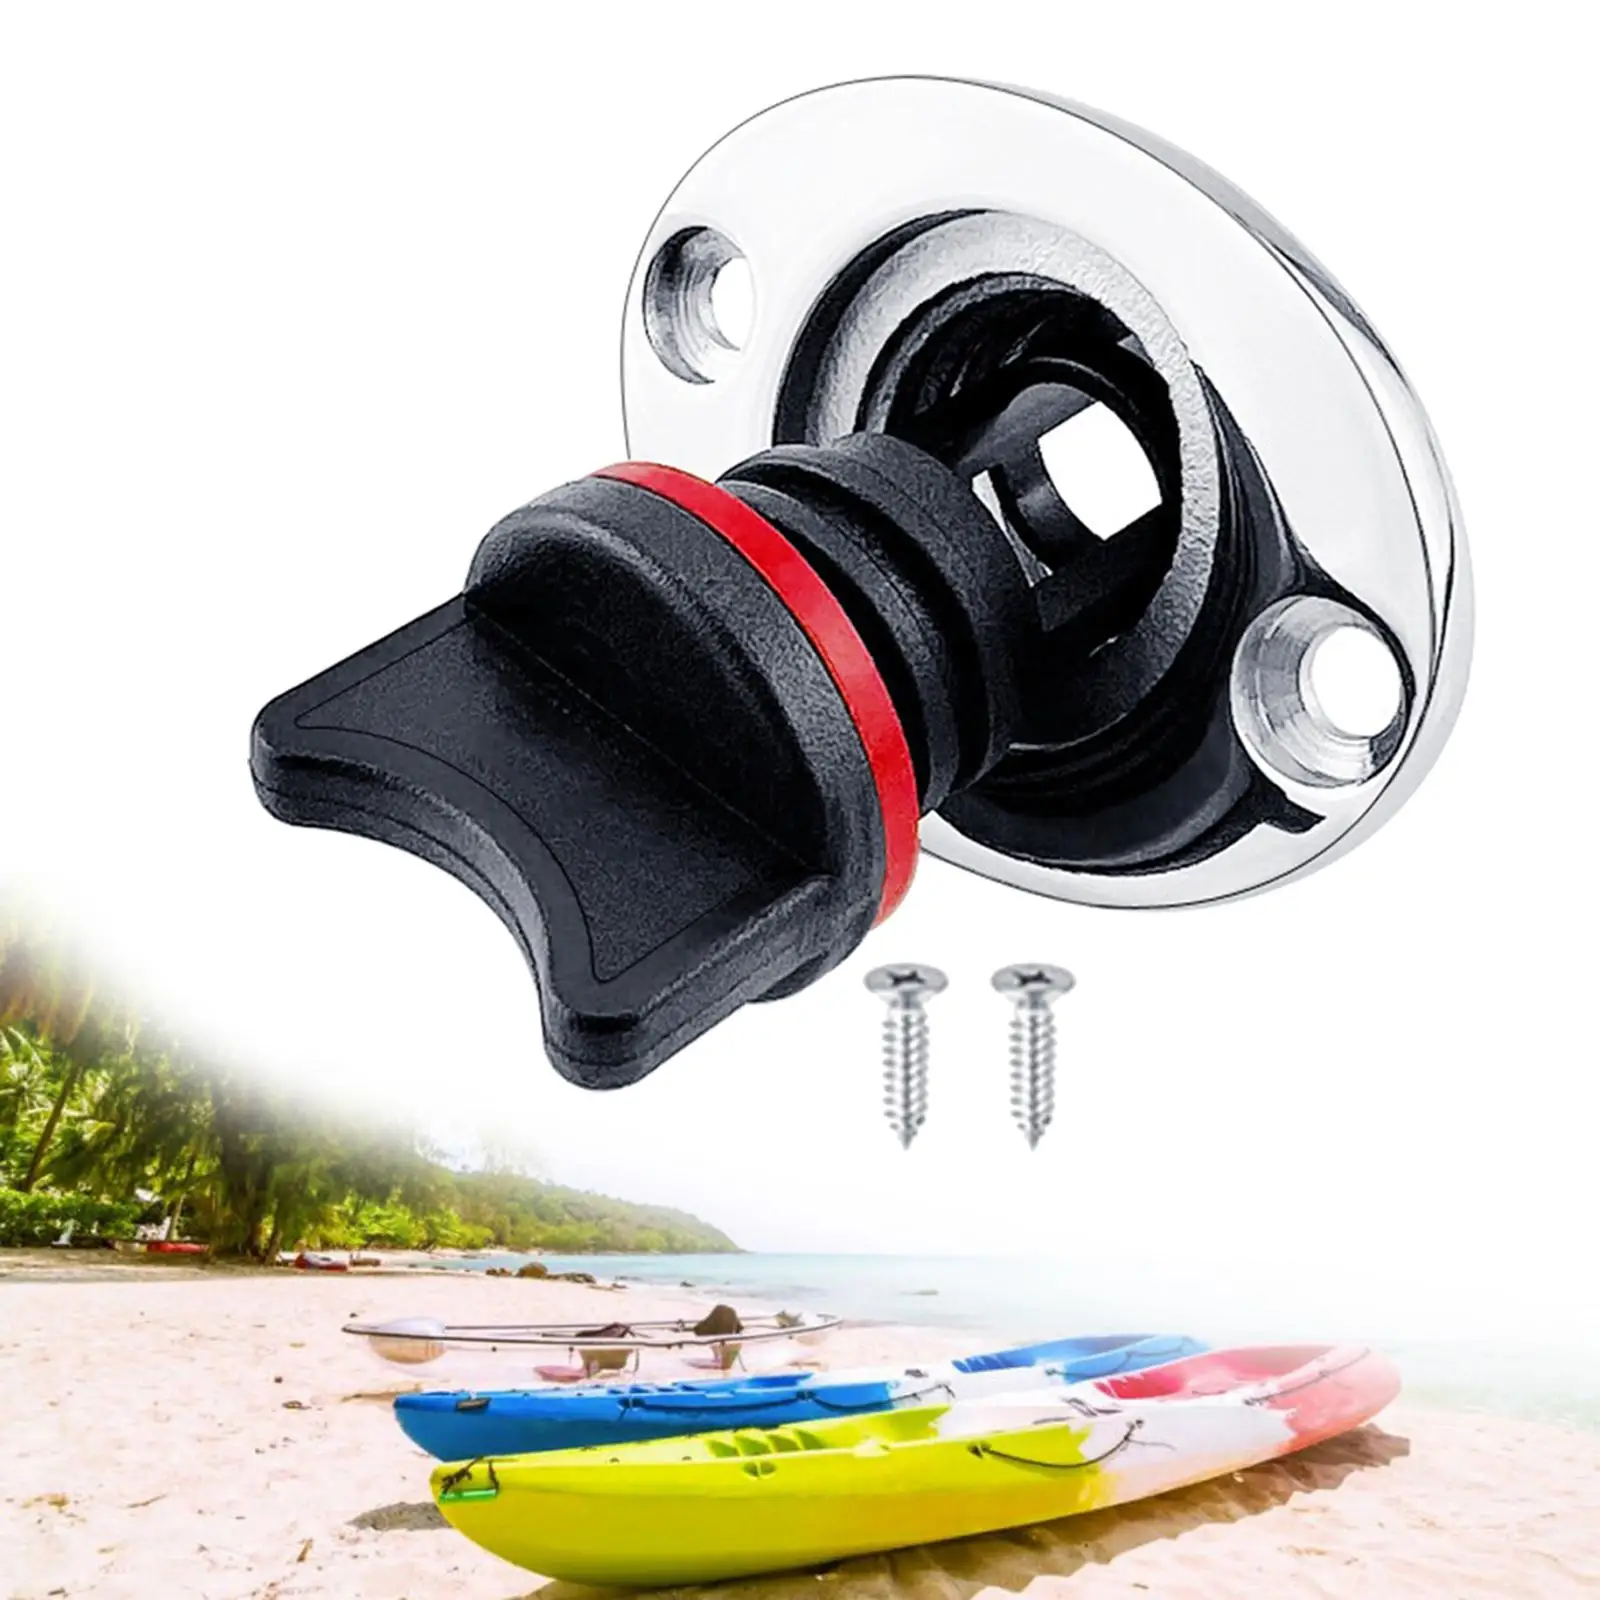 Boat Drain Plug Replacement Transom Hull Drain for 25mm 1`` Hole `` Thread Marine Boat Yacht Kayak Canoe Accessory